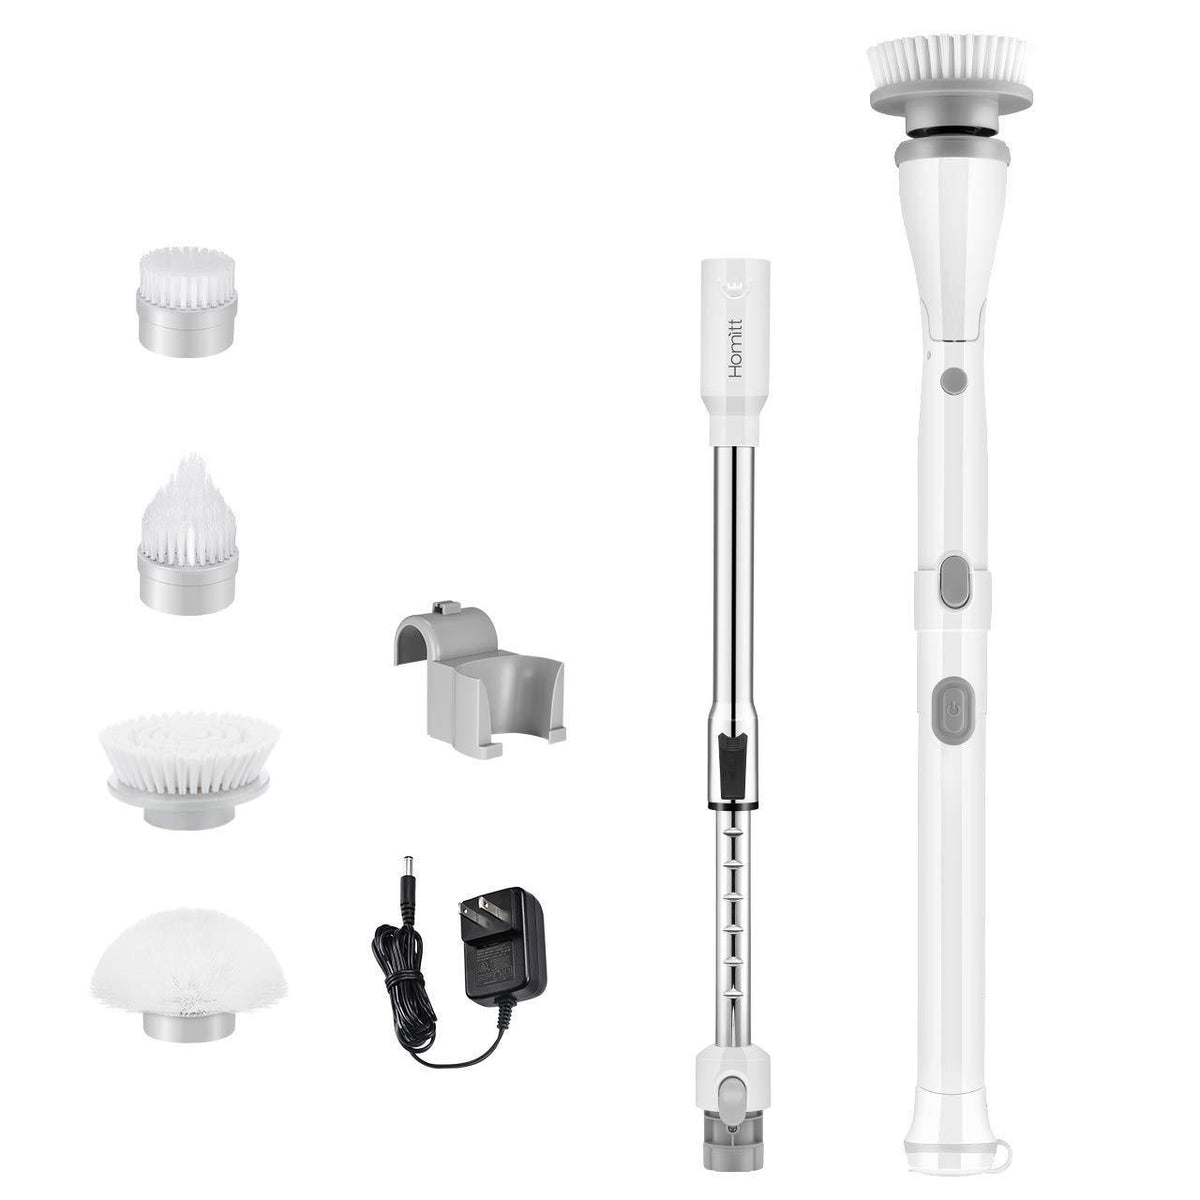 Homitt Electric Spin Cordless Shower Scrubber review - The Gadgeteer